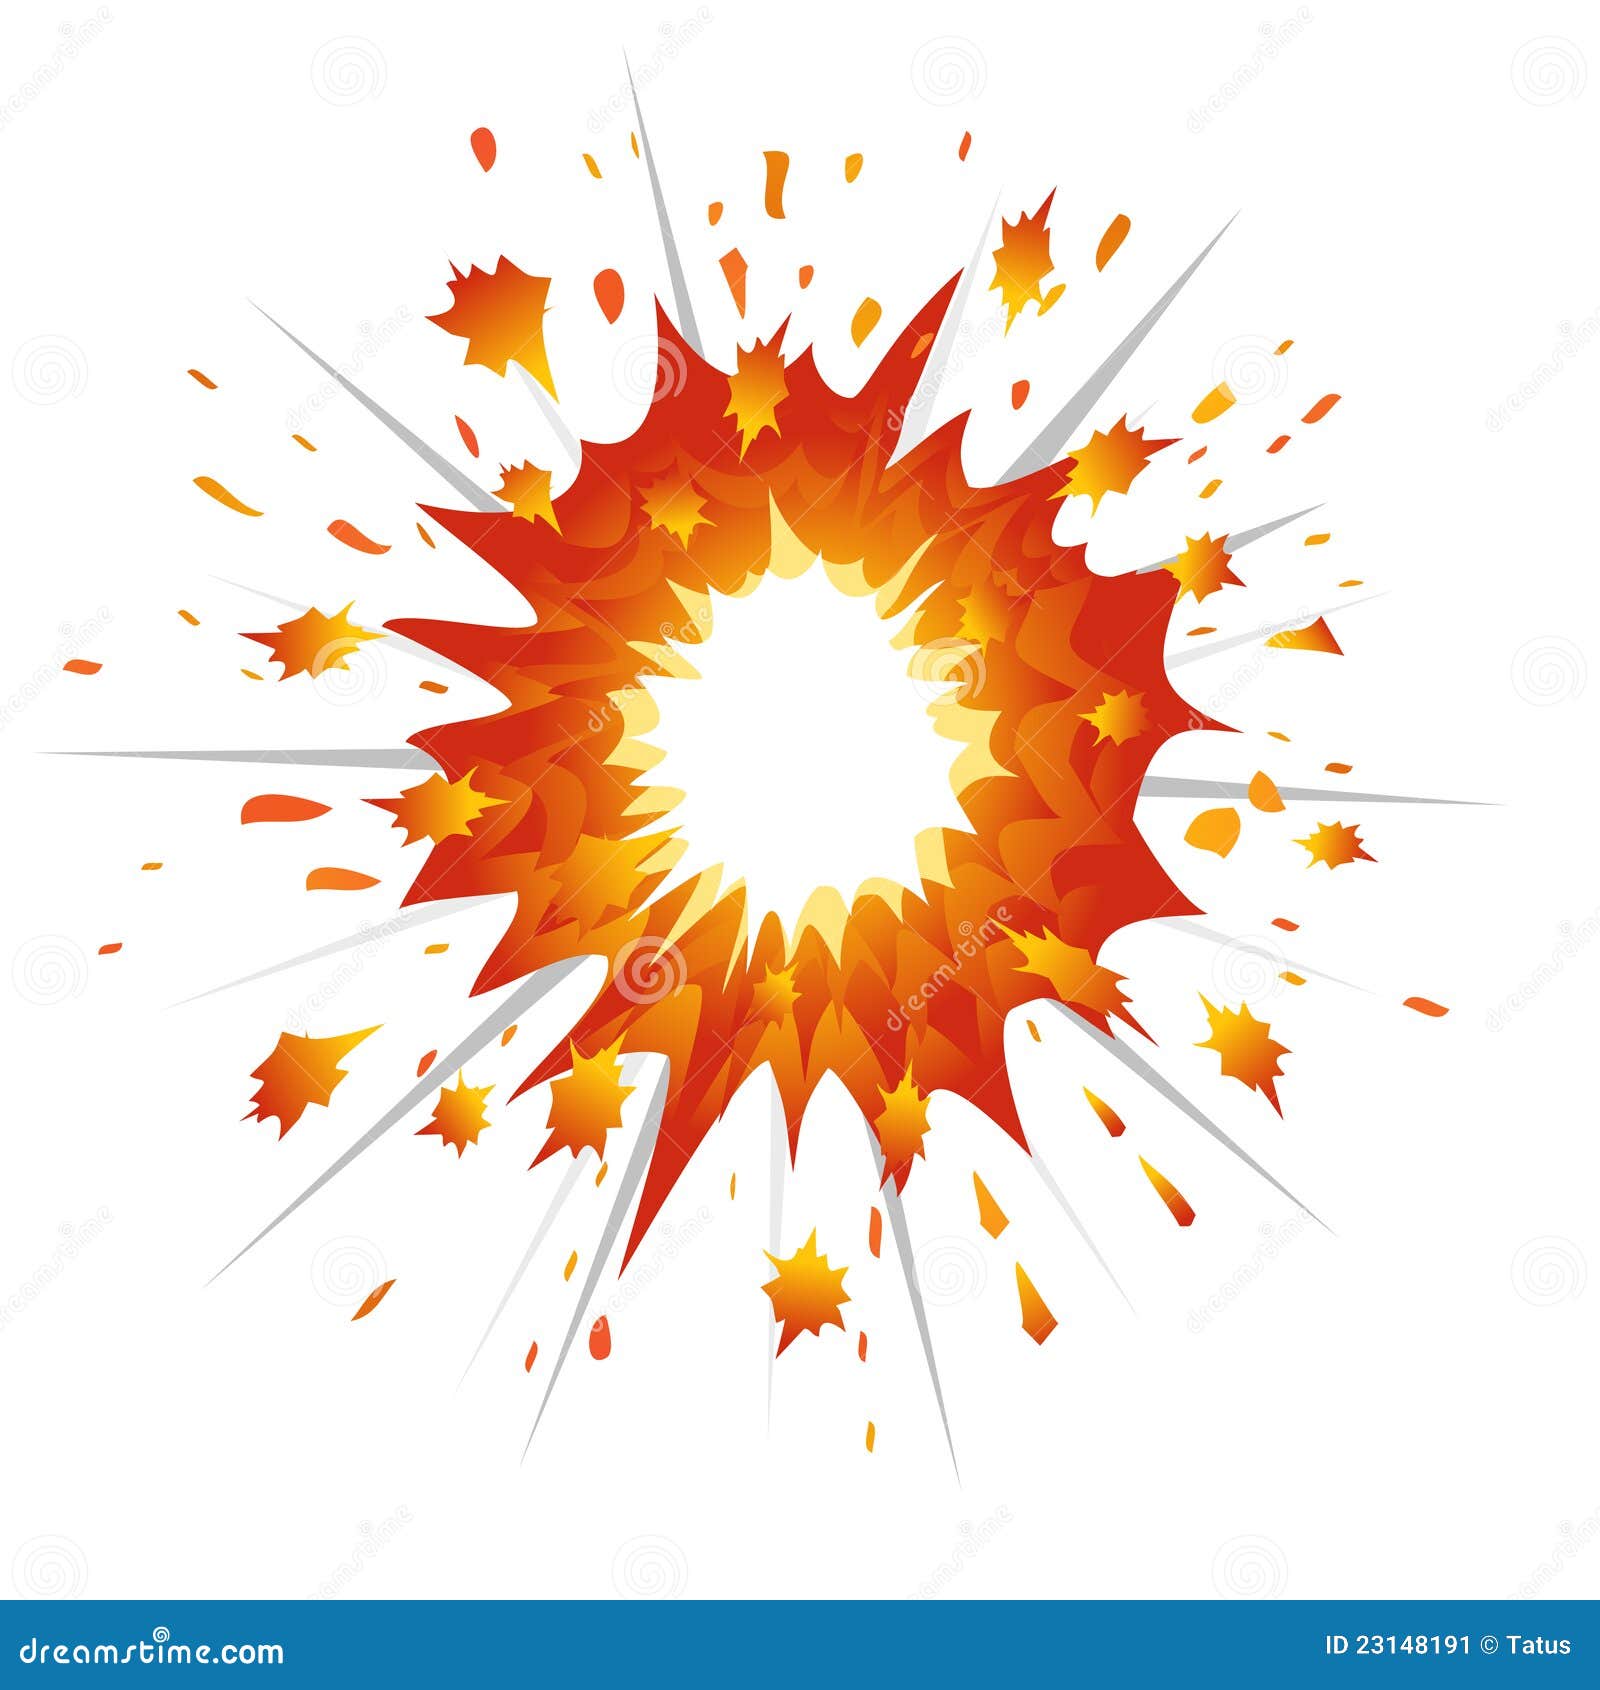 clipart explosion download - photo #40